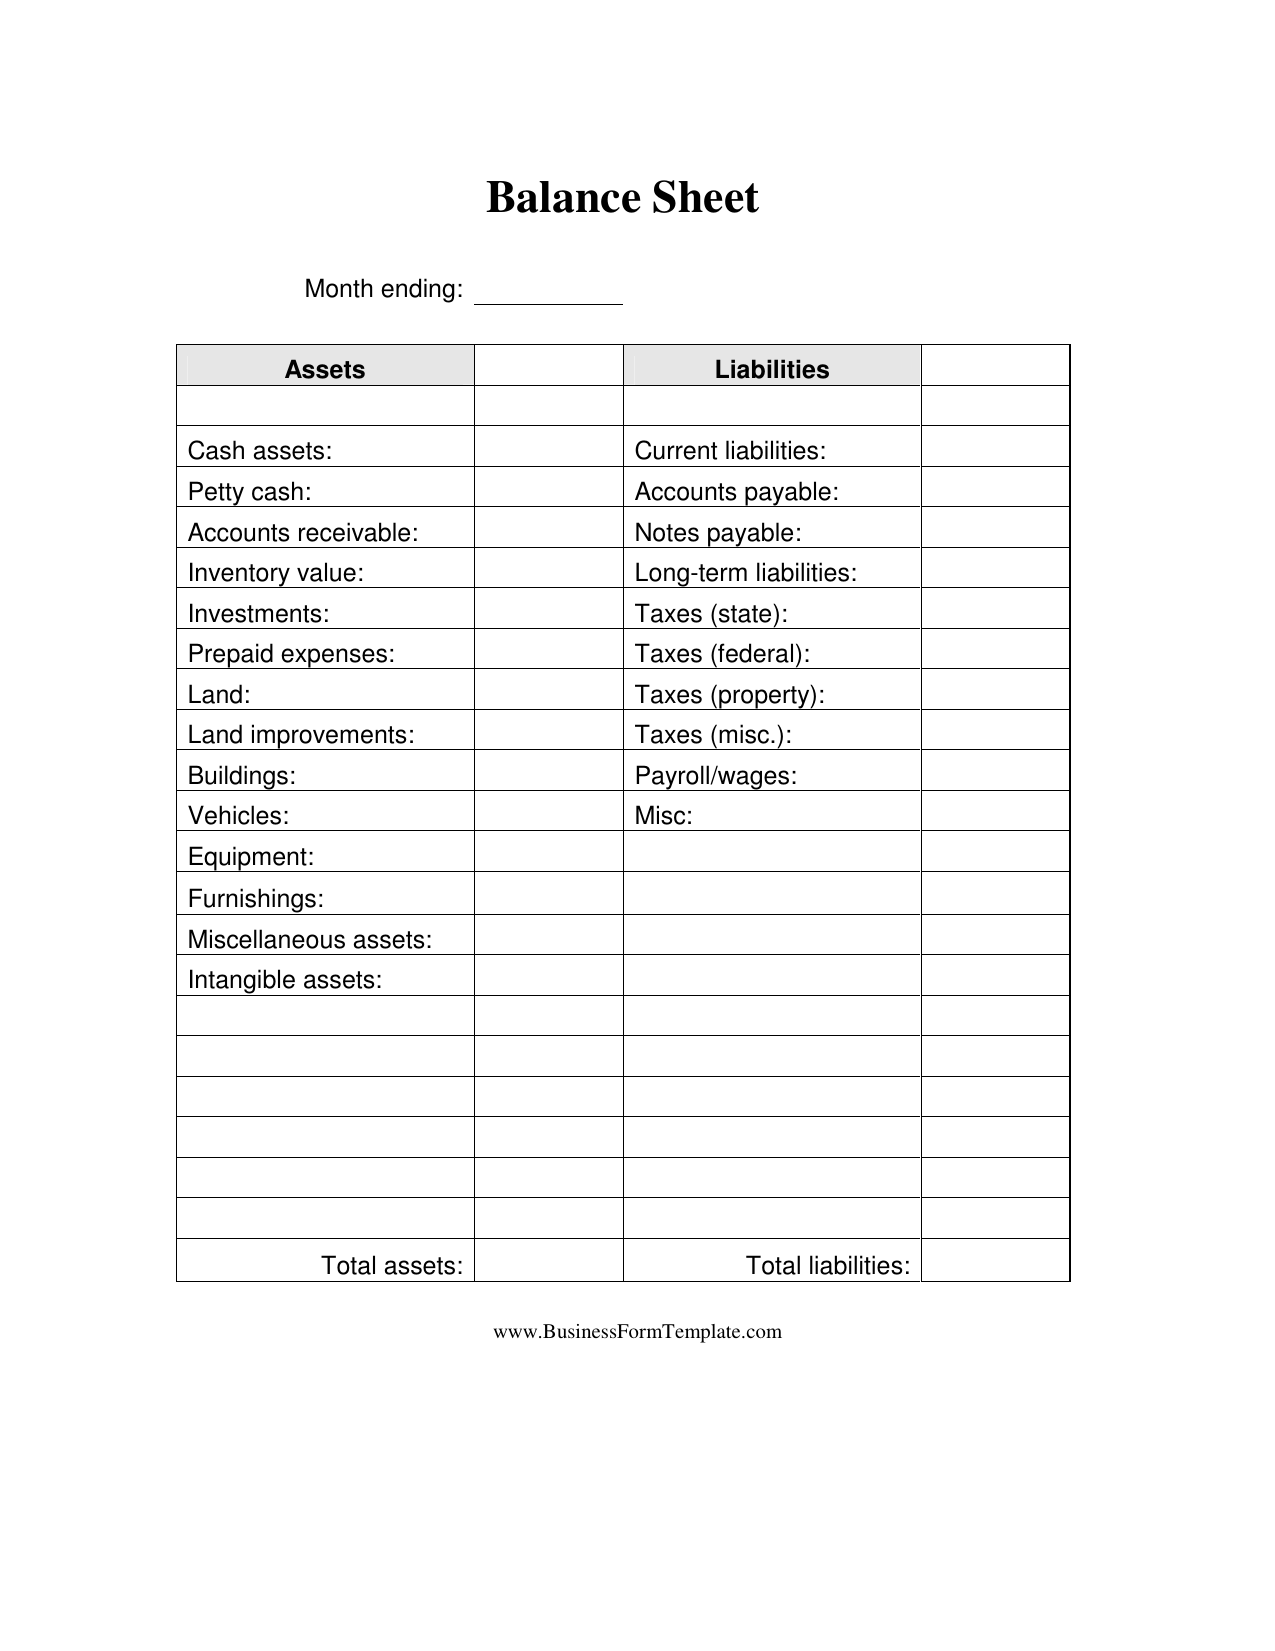 download-business-balance-sheet-template-excel-pdf-rtf-word